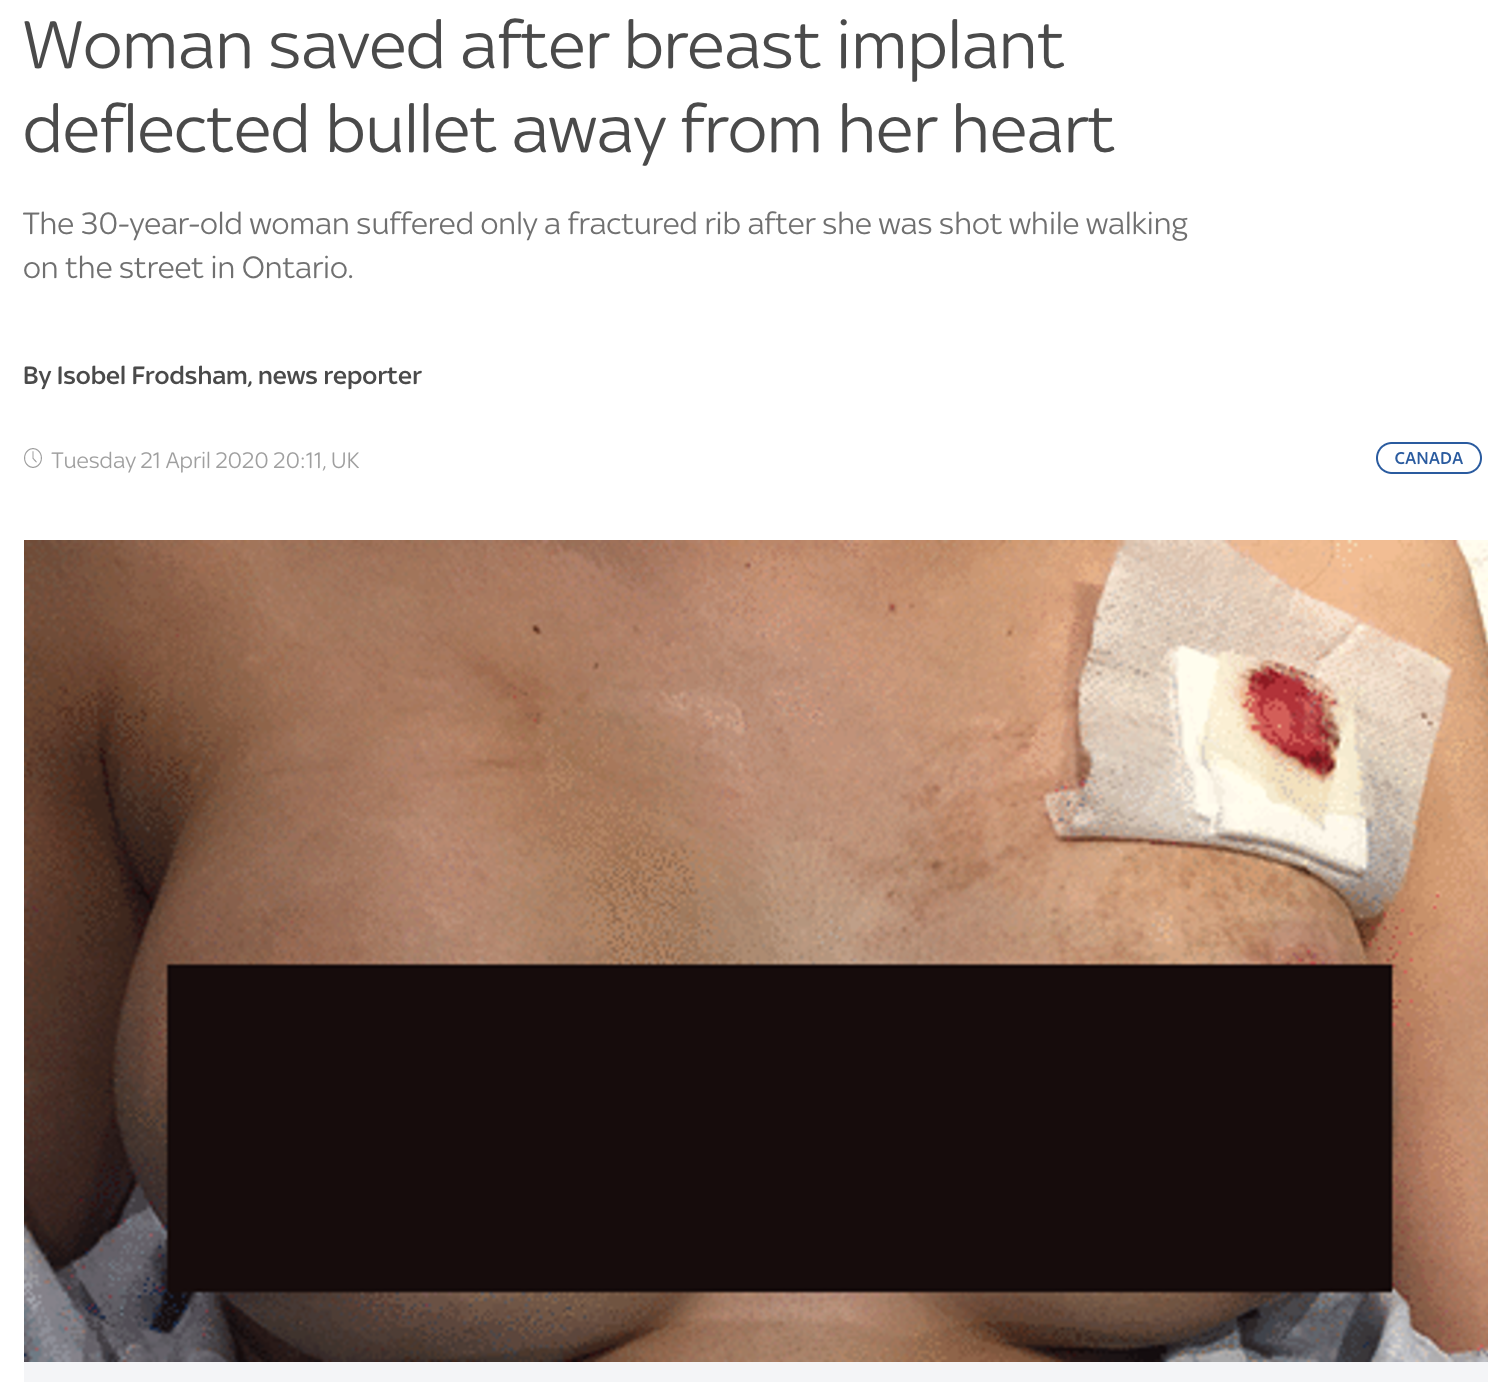 Woman saved after breast implant deflected bullet away from her heart The 30-year-old woman suffered only a fractured rib after she was shot while walking on the street in Ontario